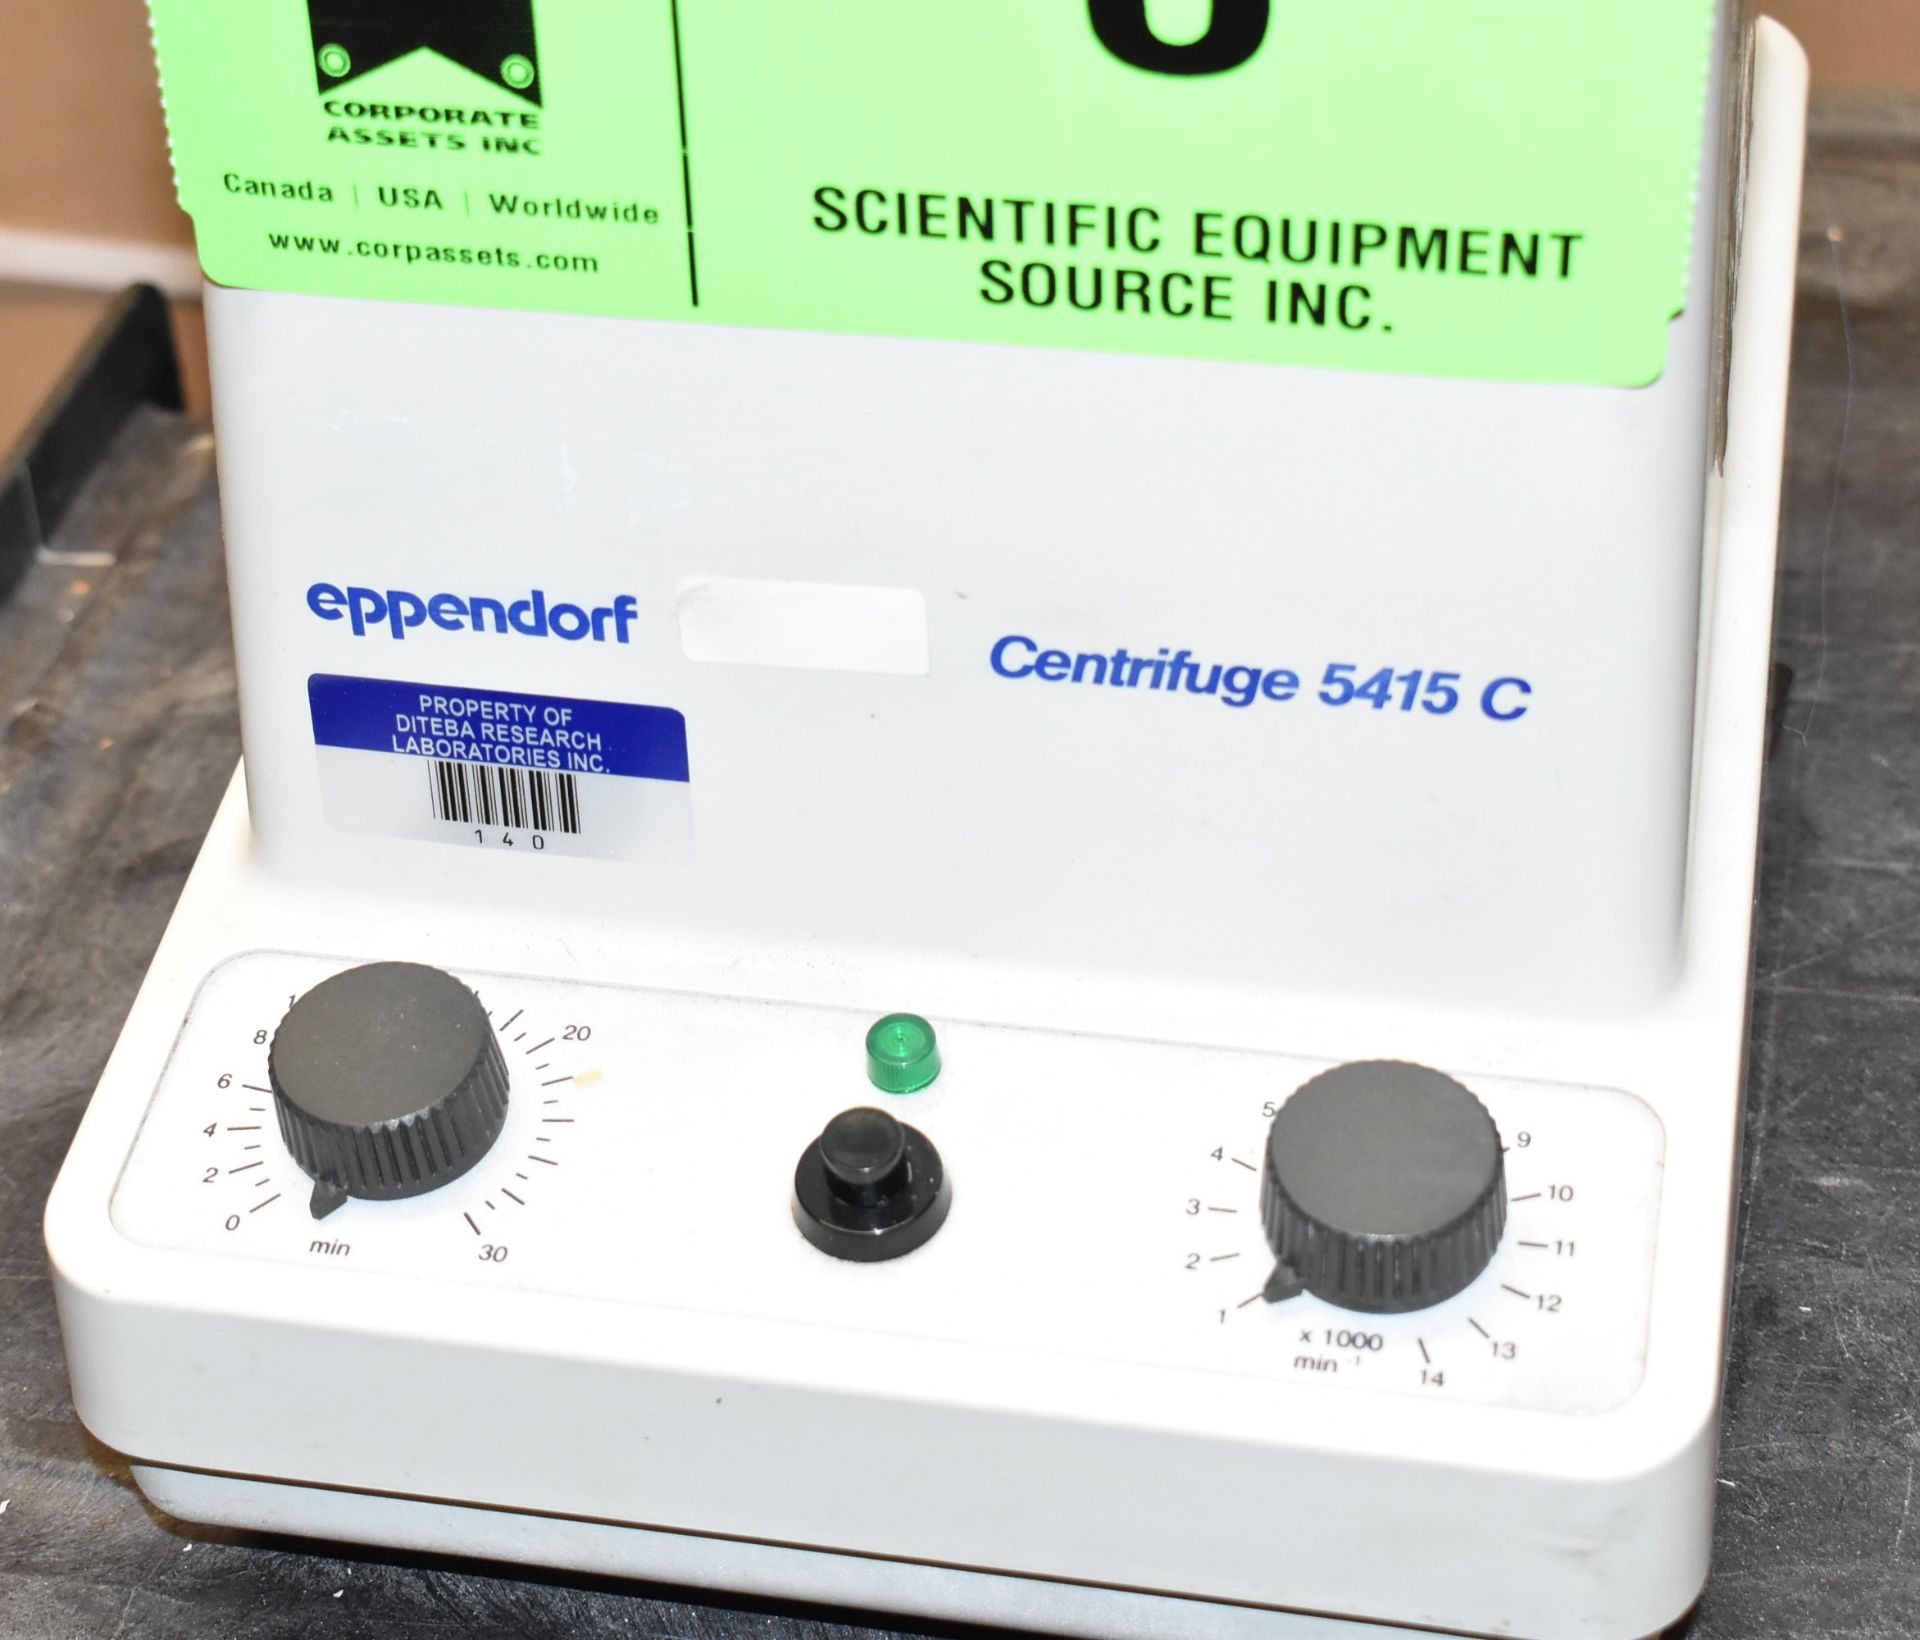 EPPENDORF 5415C BENCHTOP ROTARY MICRO-CENTRIFUGE WITH VARIABLE SPEEDS UP TO 14,000 RPM, 18X1.5ML - Image 3 of 4